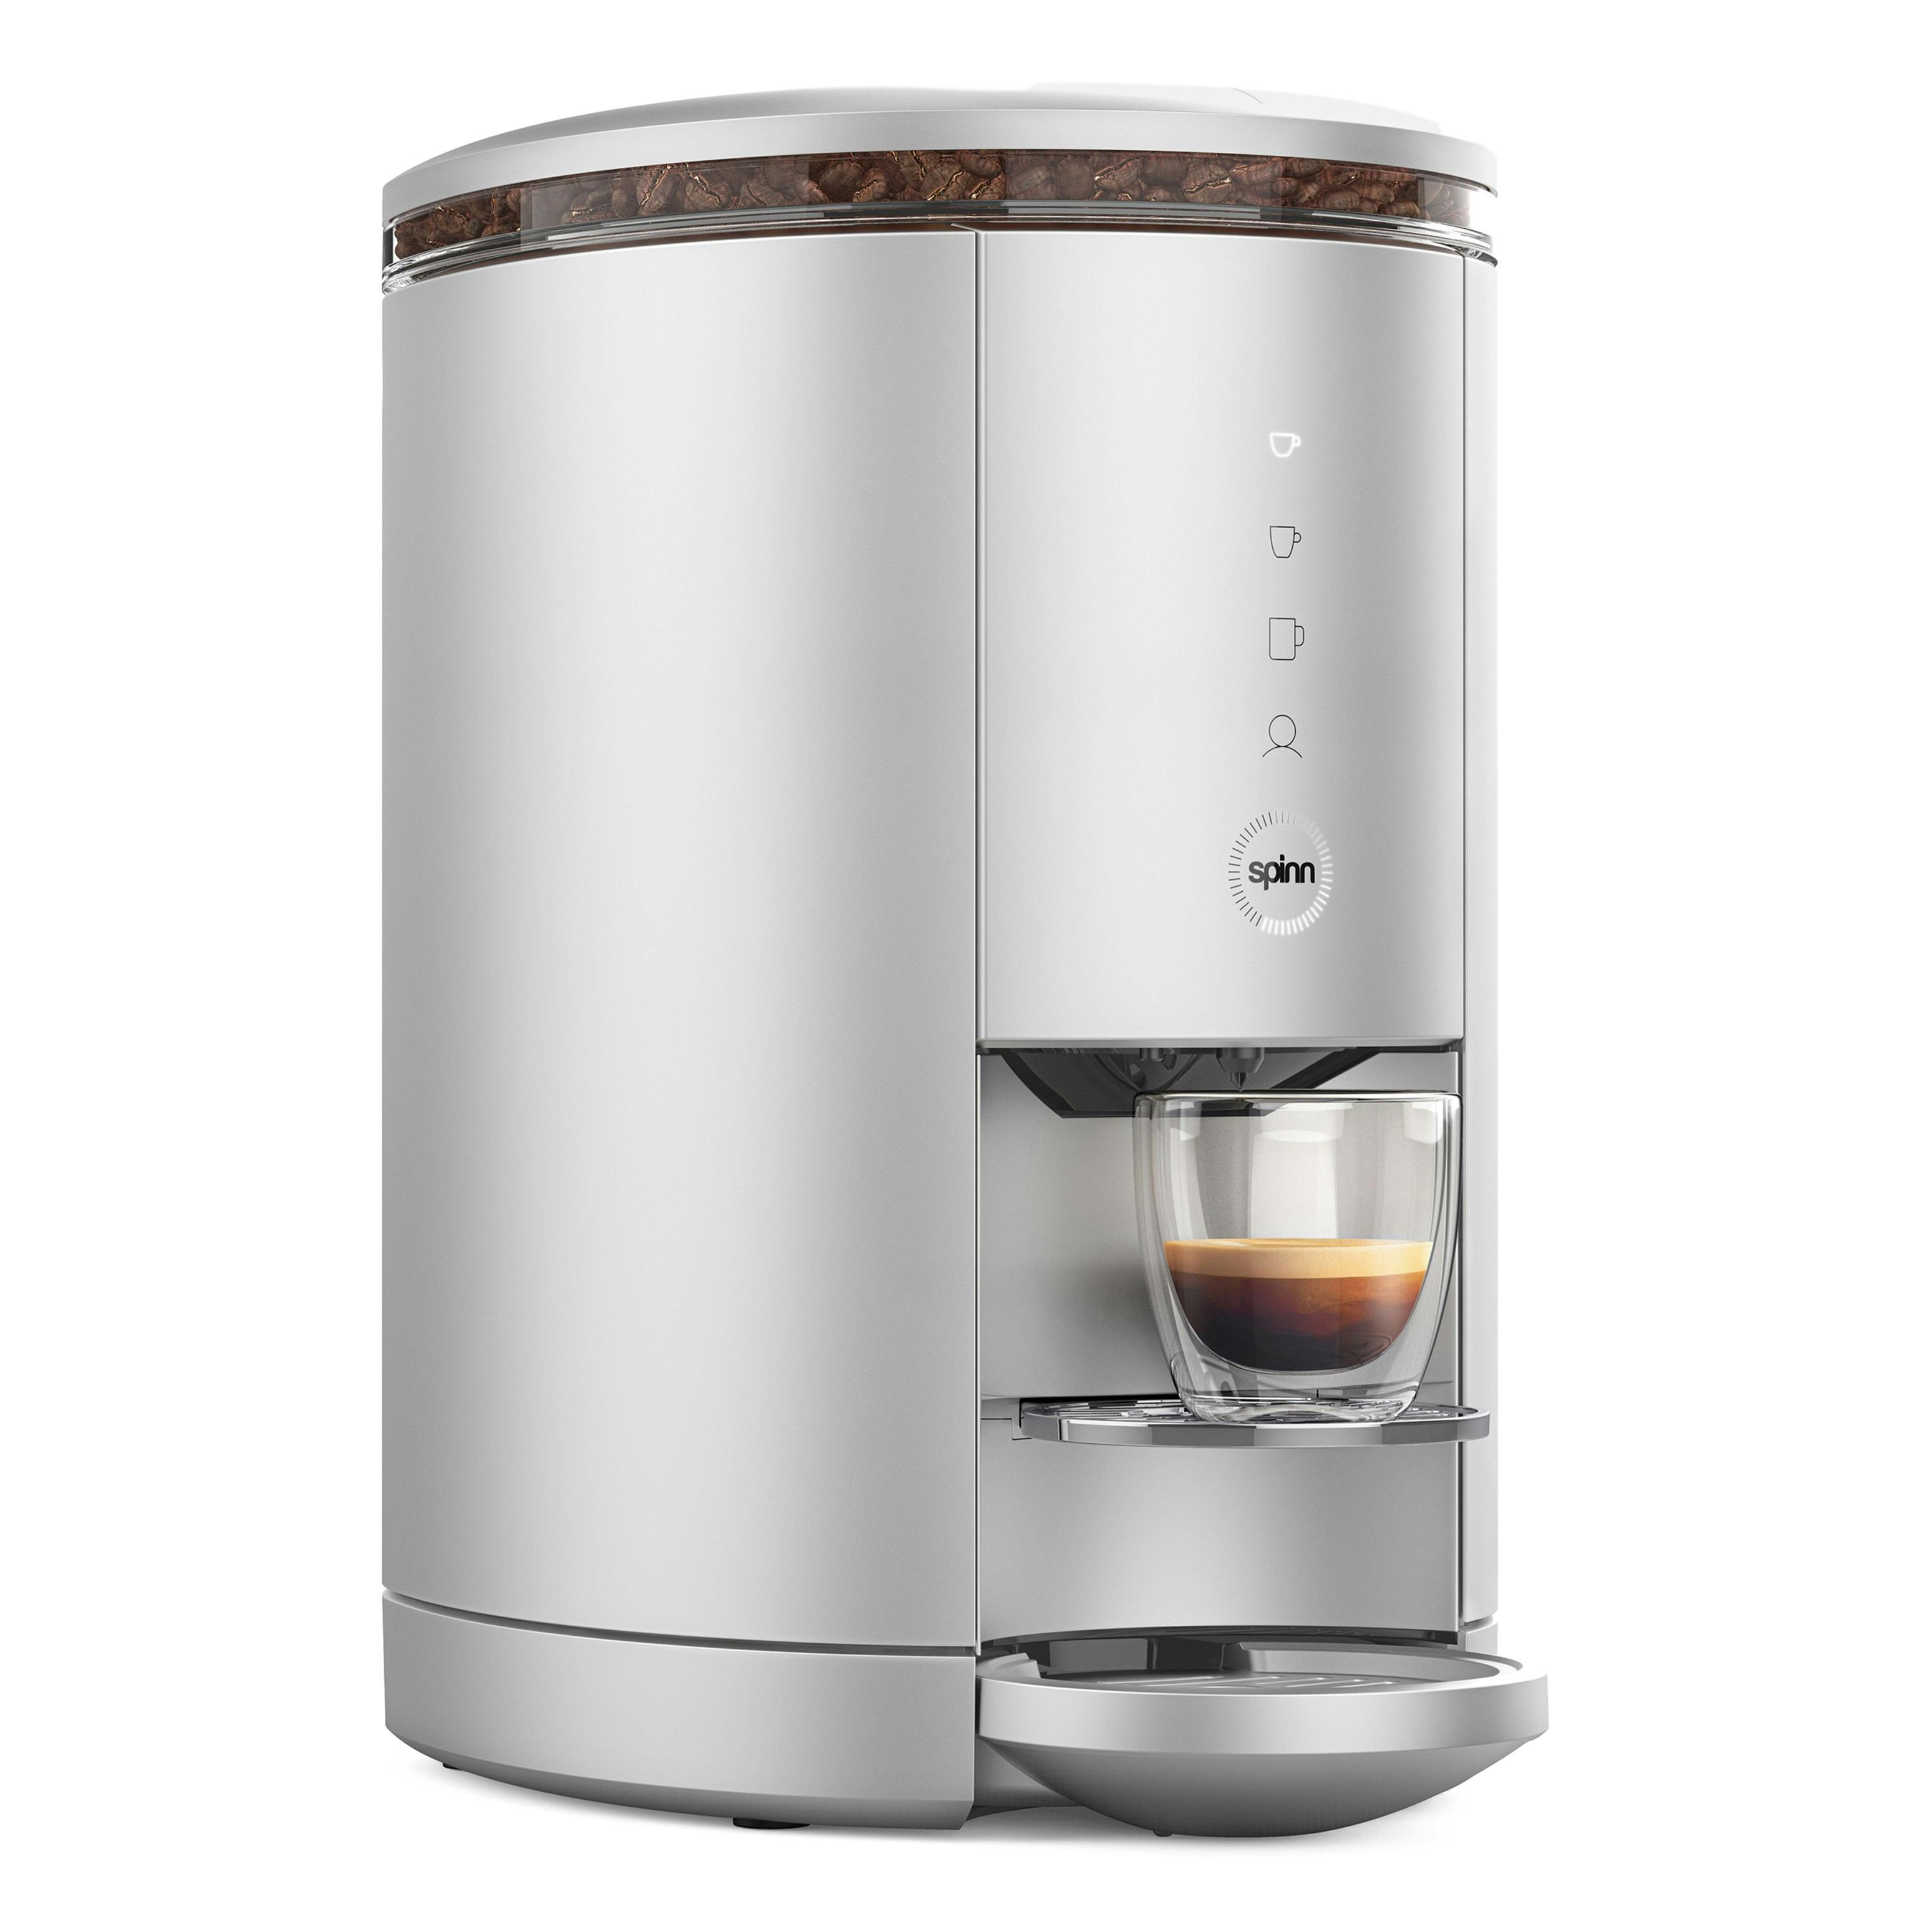 Spinn - automatic and wifi connected espresso maker